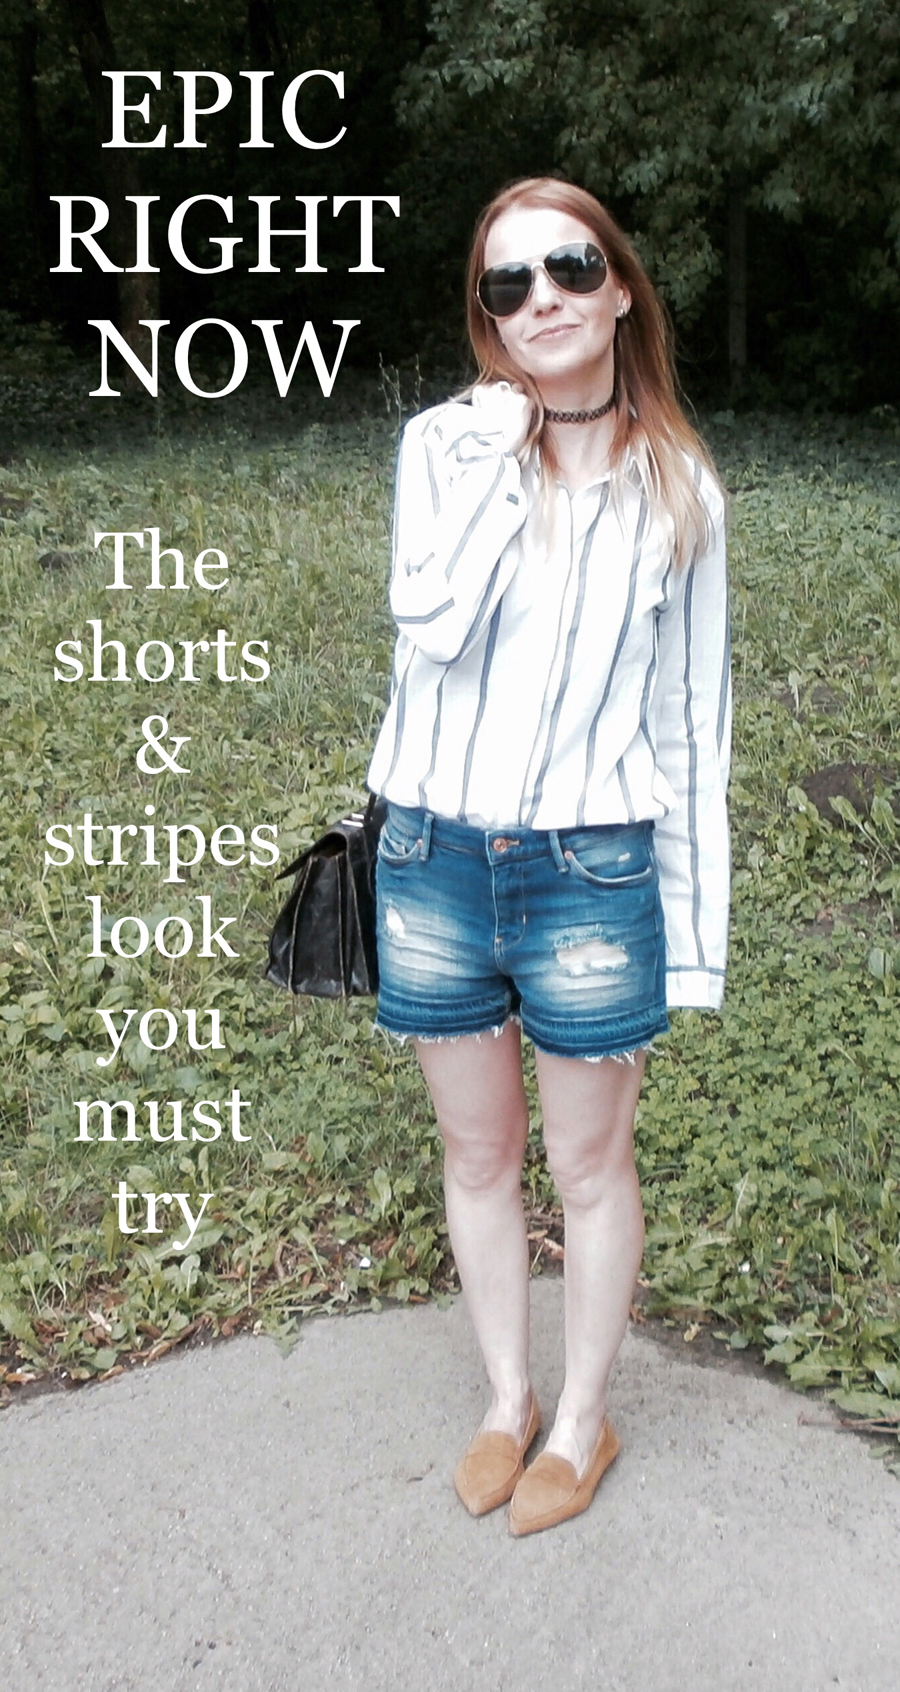 epic-right-now-best-denim-shorts-stripes-look-must-try